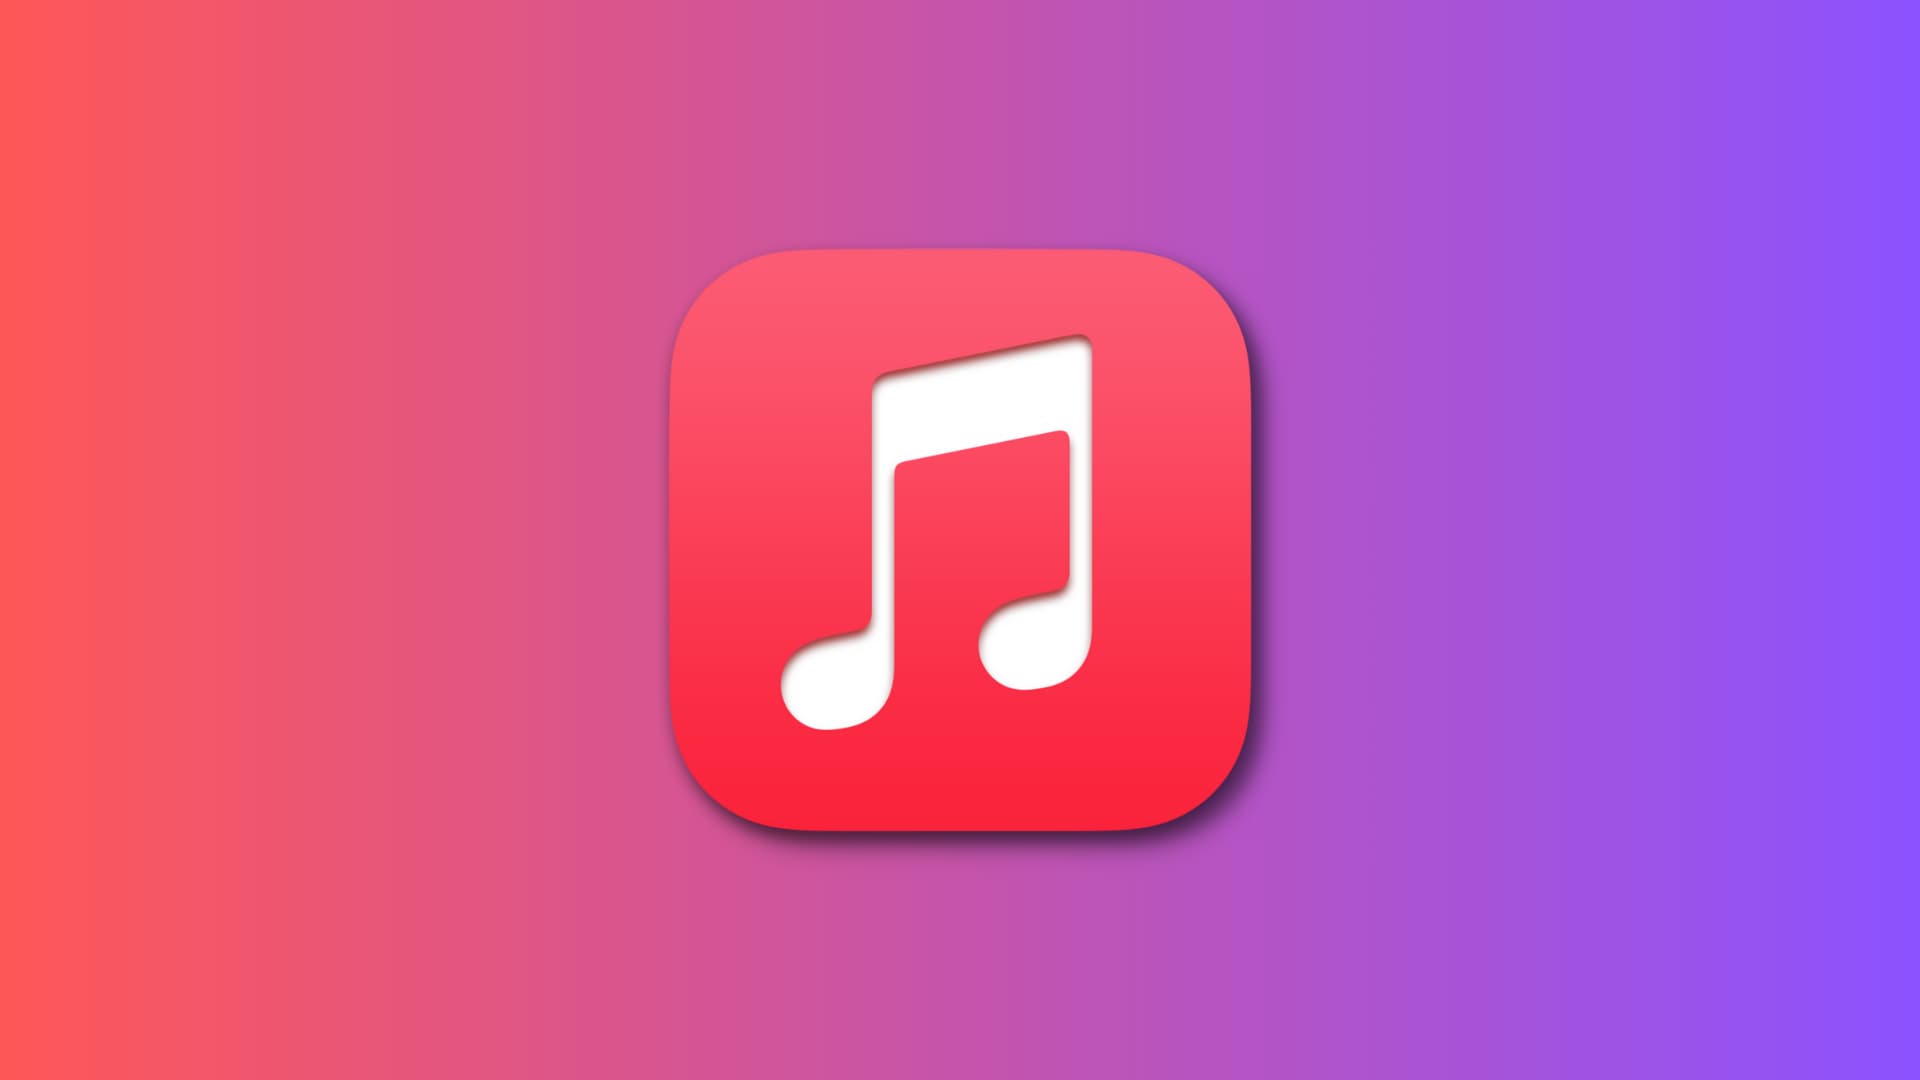 VolPause lets jailbreakers pause and play music playback by pressing both volume buttons